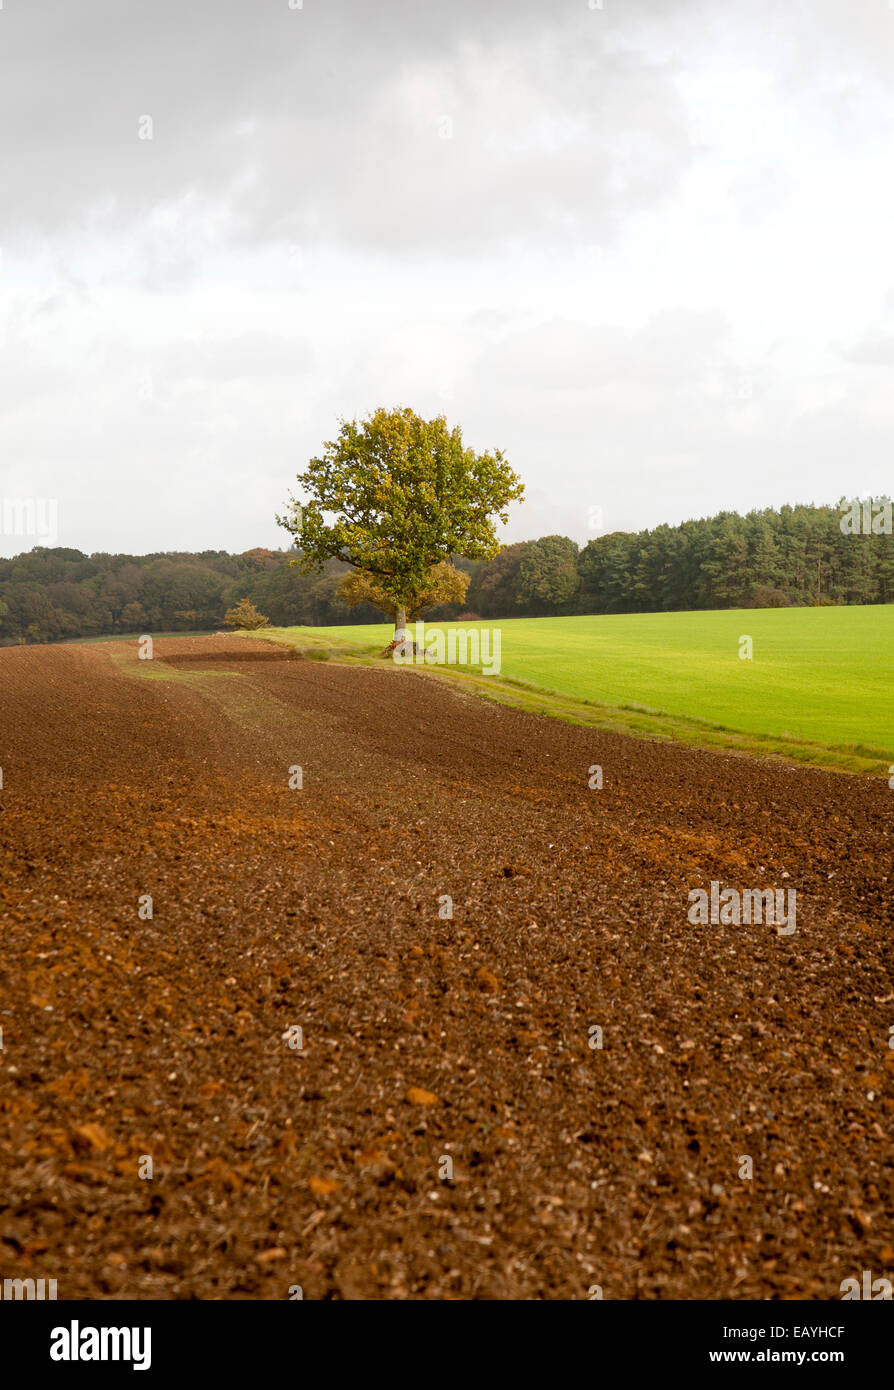 Landscape with fields and single oak tree standing alone, Chisbury, Wiltshire, England, UK Stock Photo